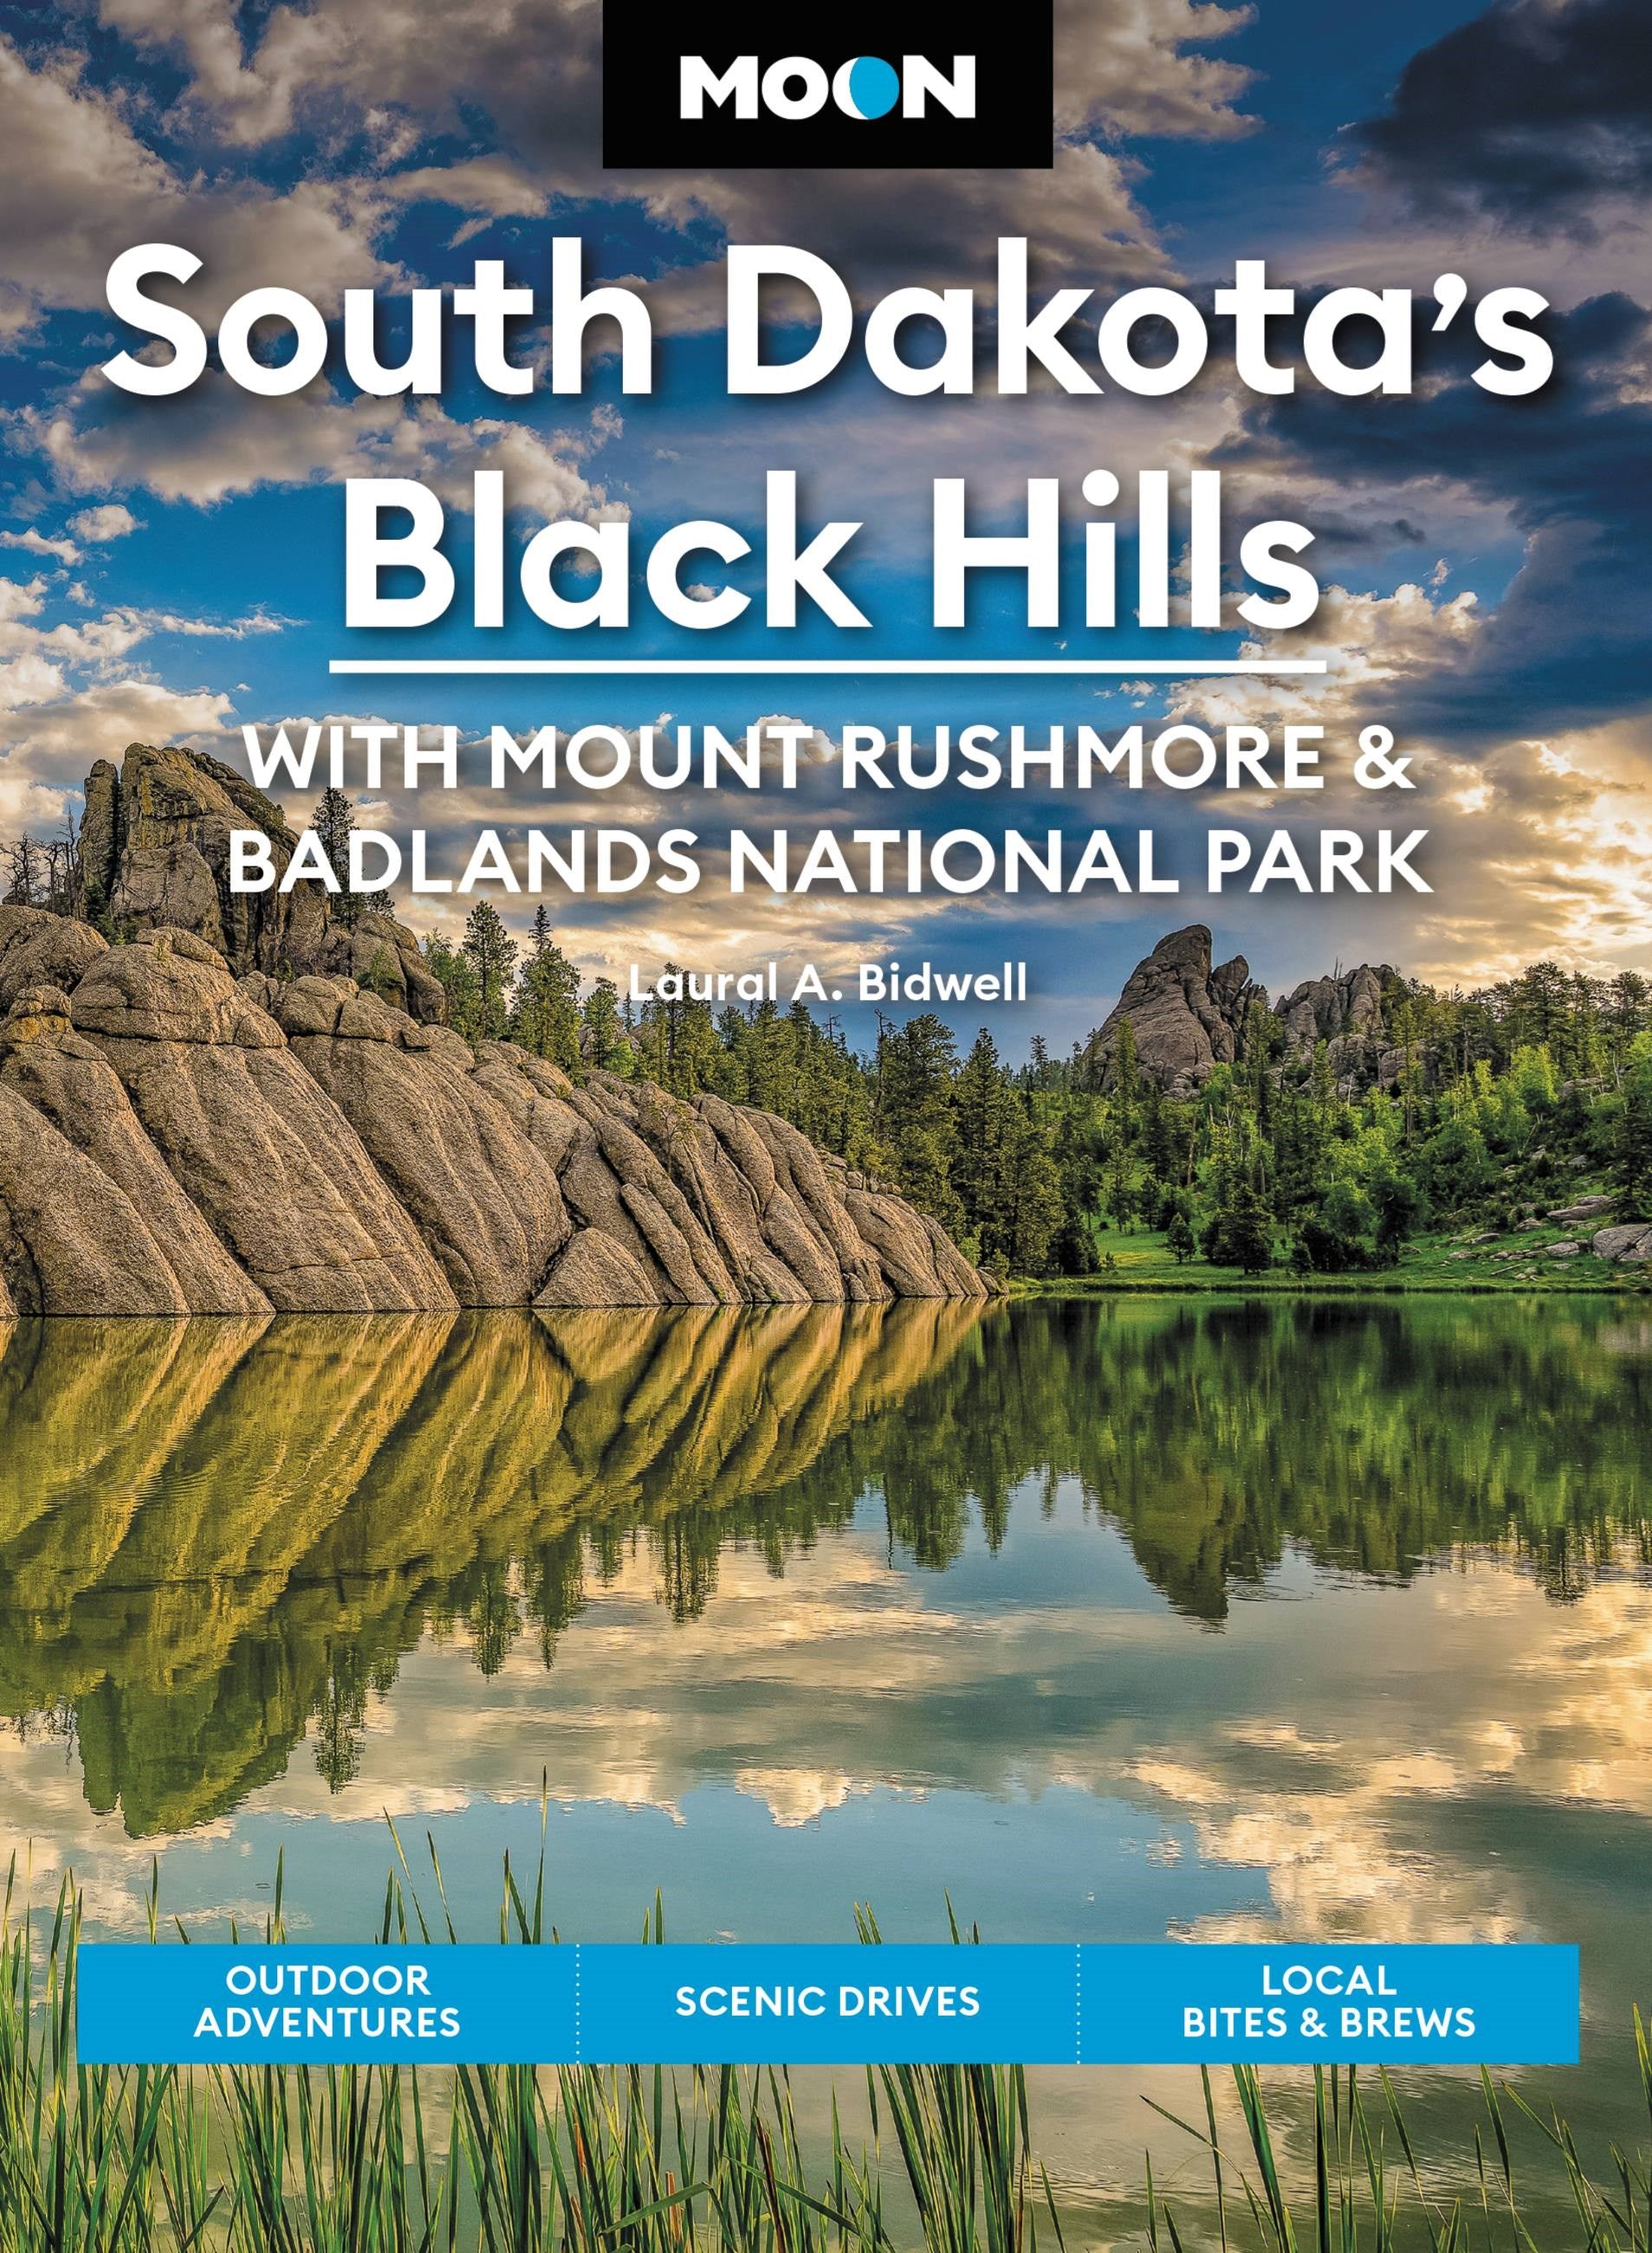 Moon South Dakota’s Black Hills: With Mount Rushmore & Badlands National Park : Outdoor Adventures, Scenic Drives, Local Bites & Brews